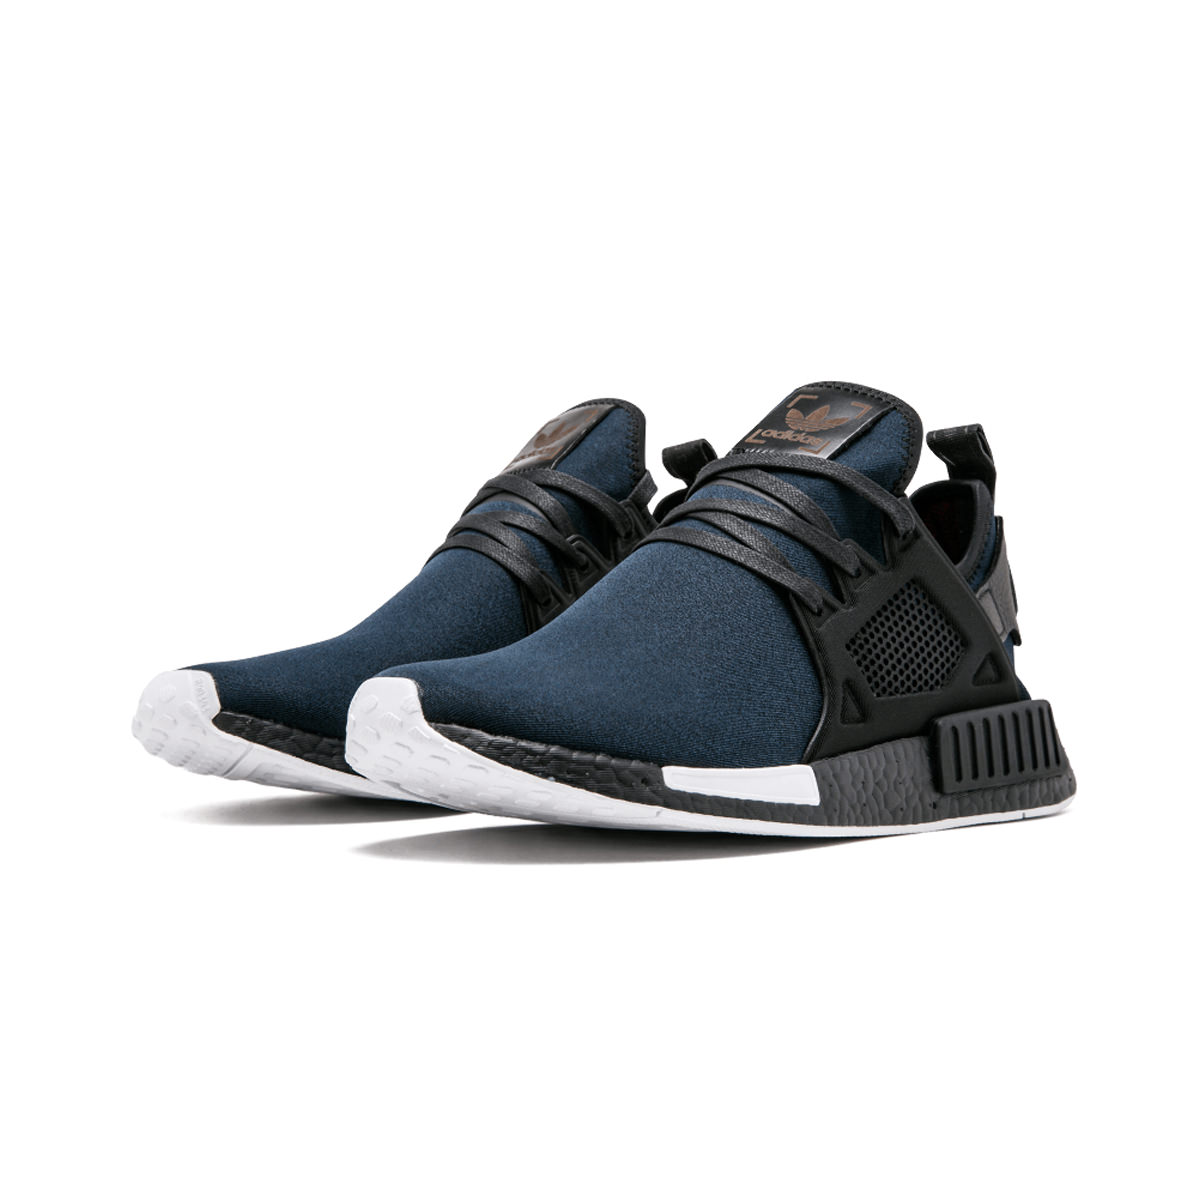 nmd xr1 henry poole